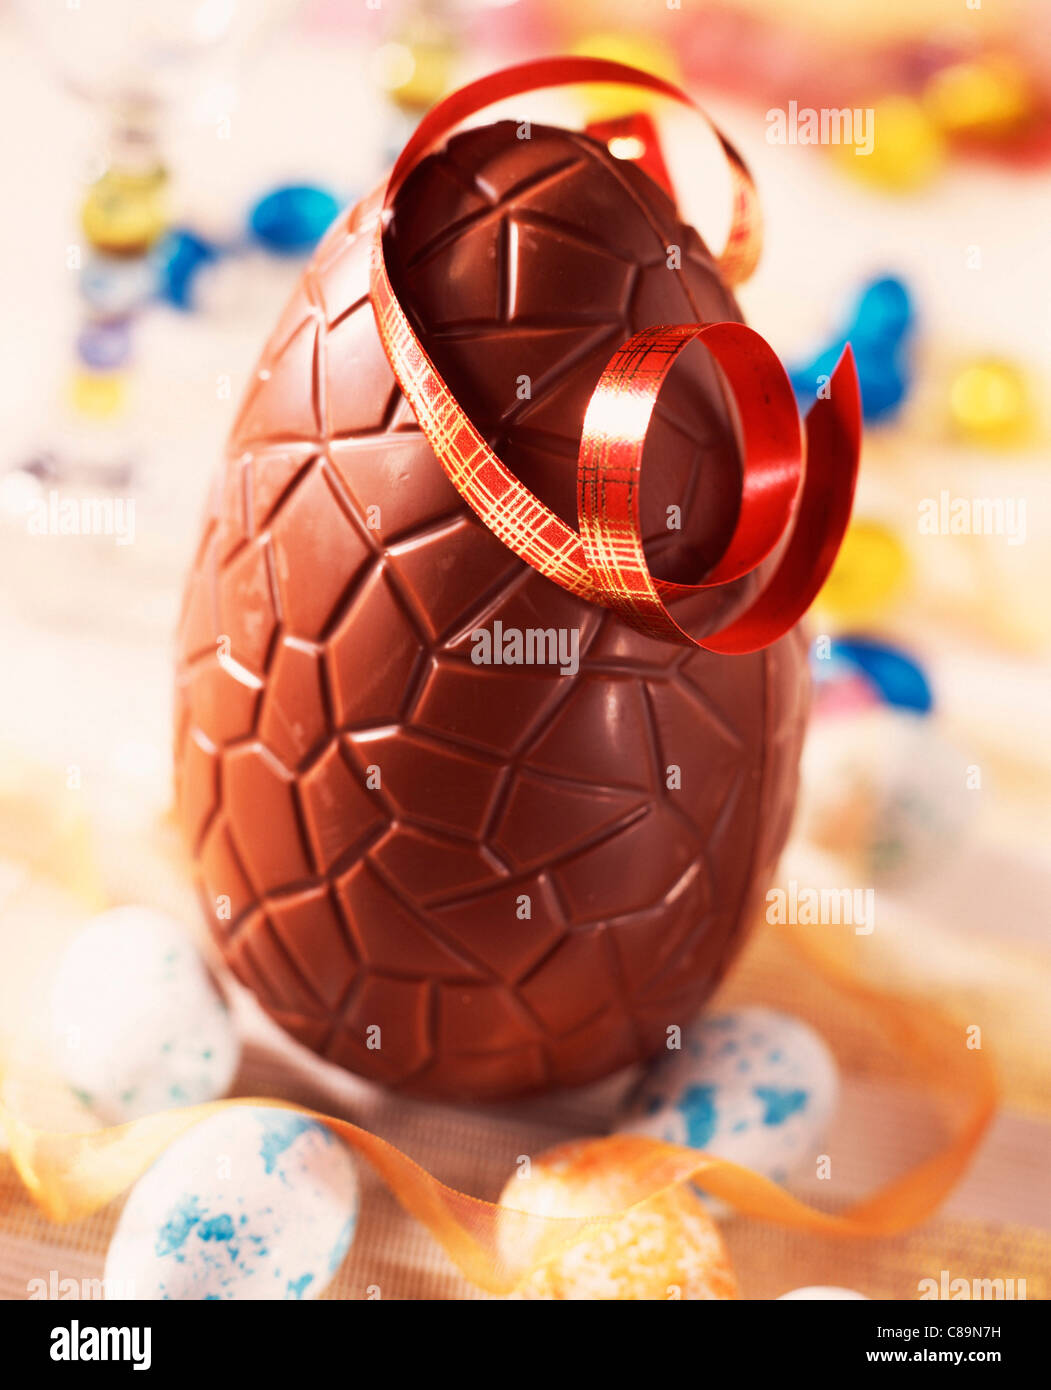 Chocolate Easter egg with ribbon Stock Photo